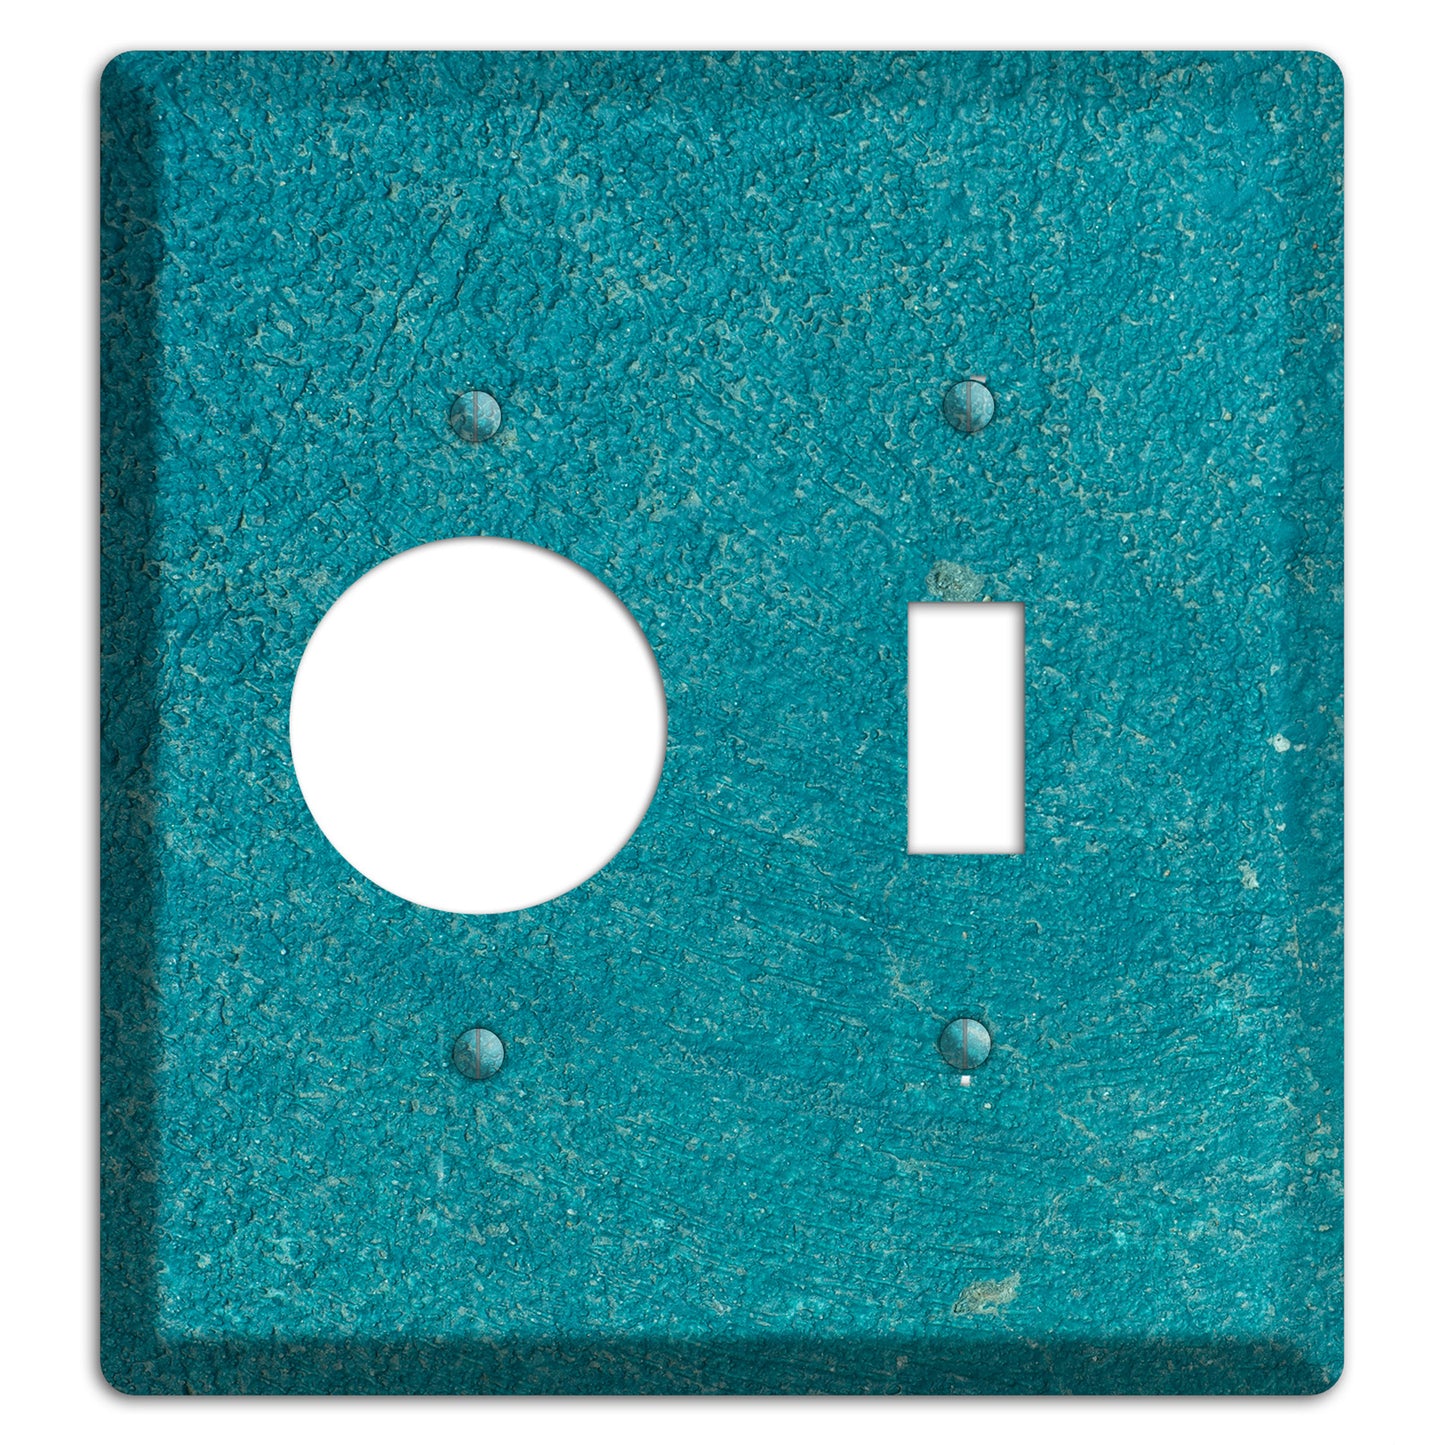 Teal concrete Receptacle / Toggle Wallplate